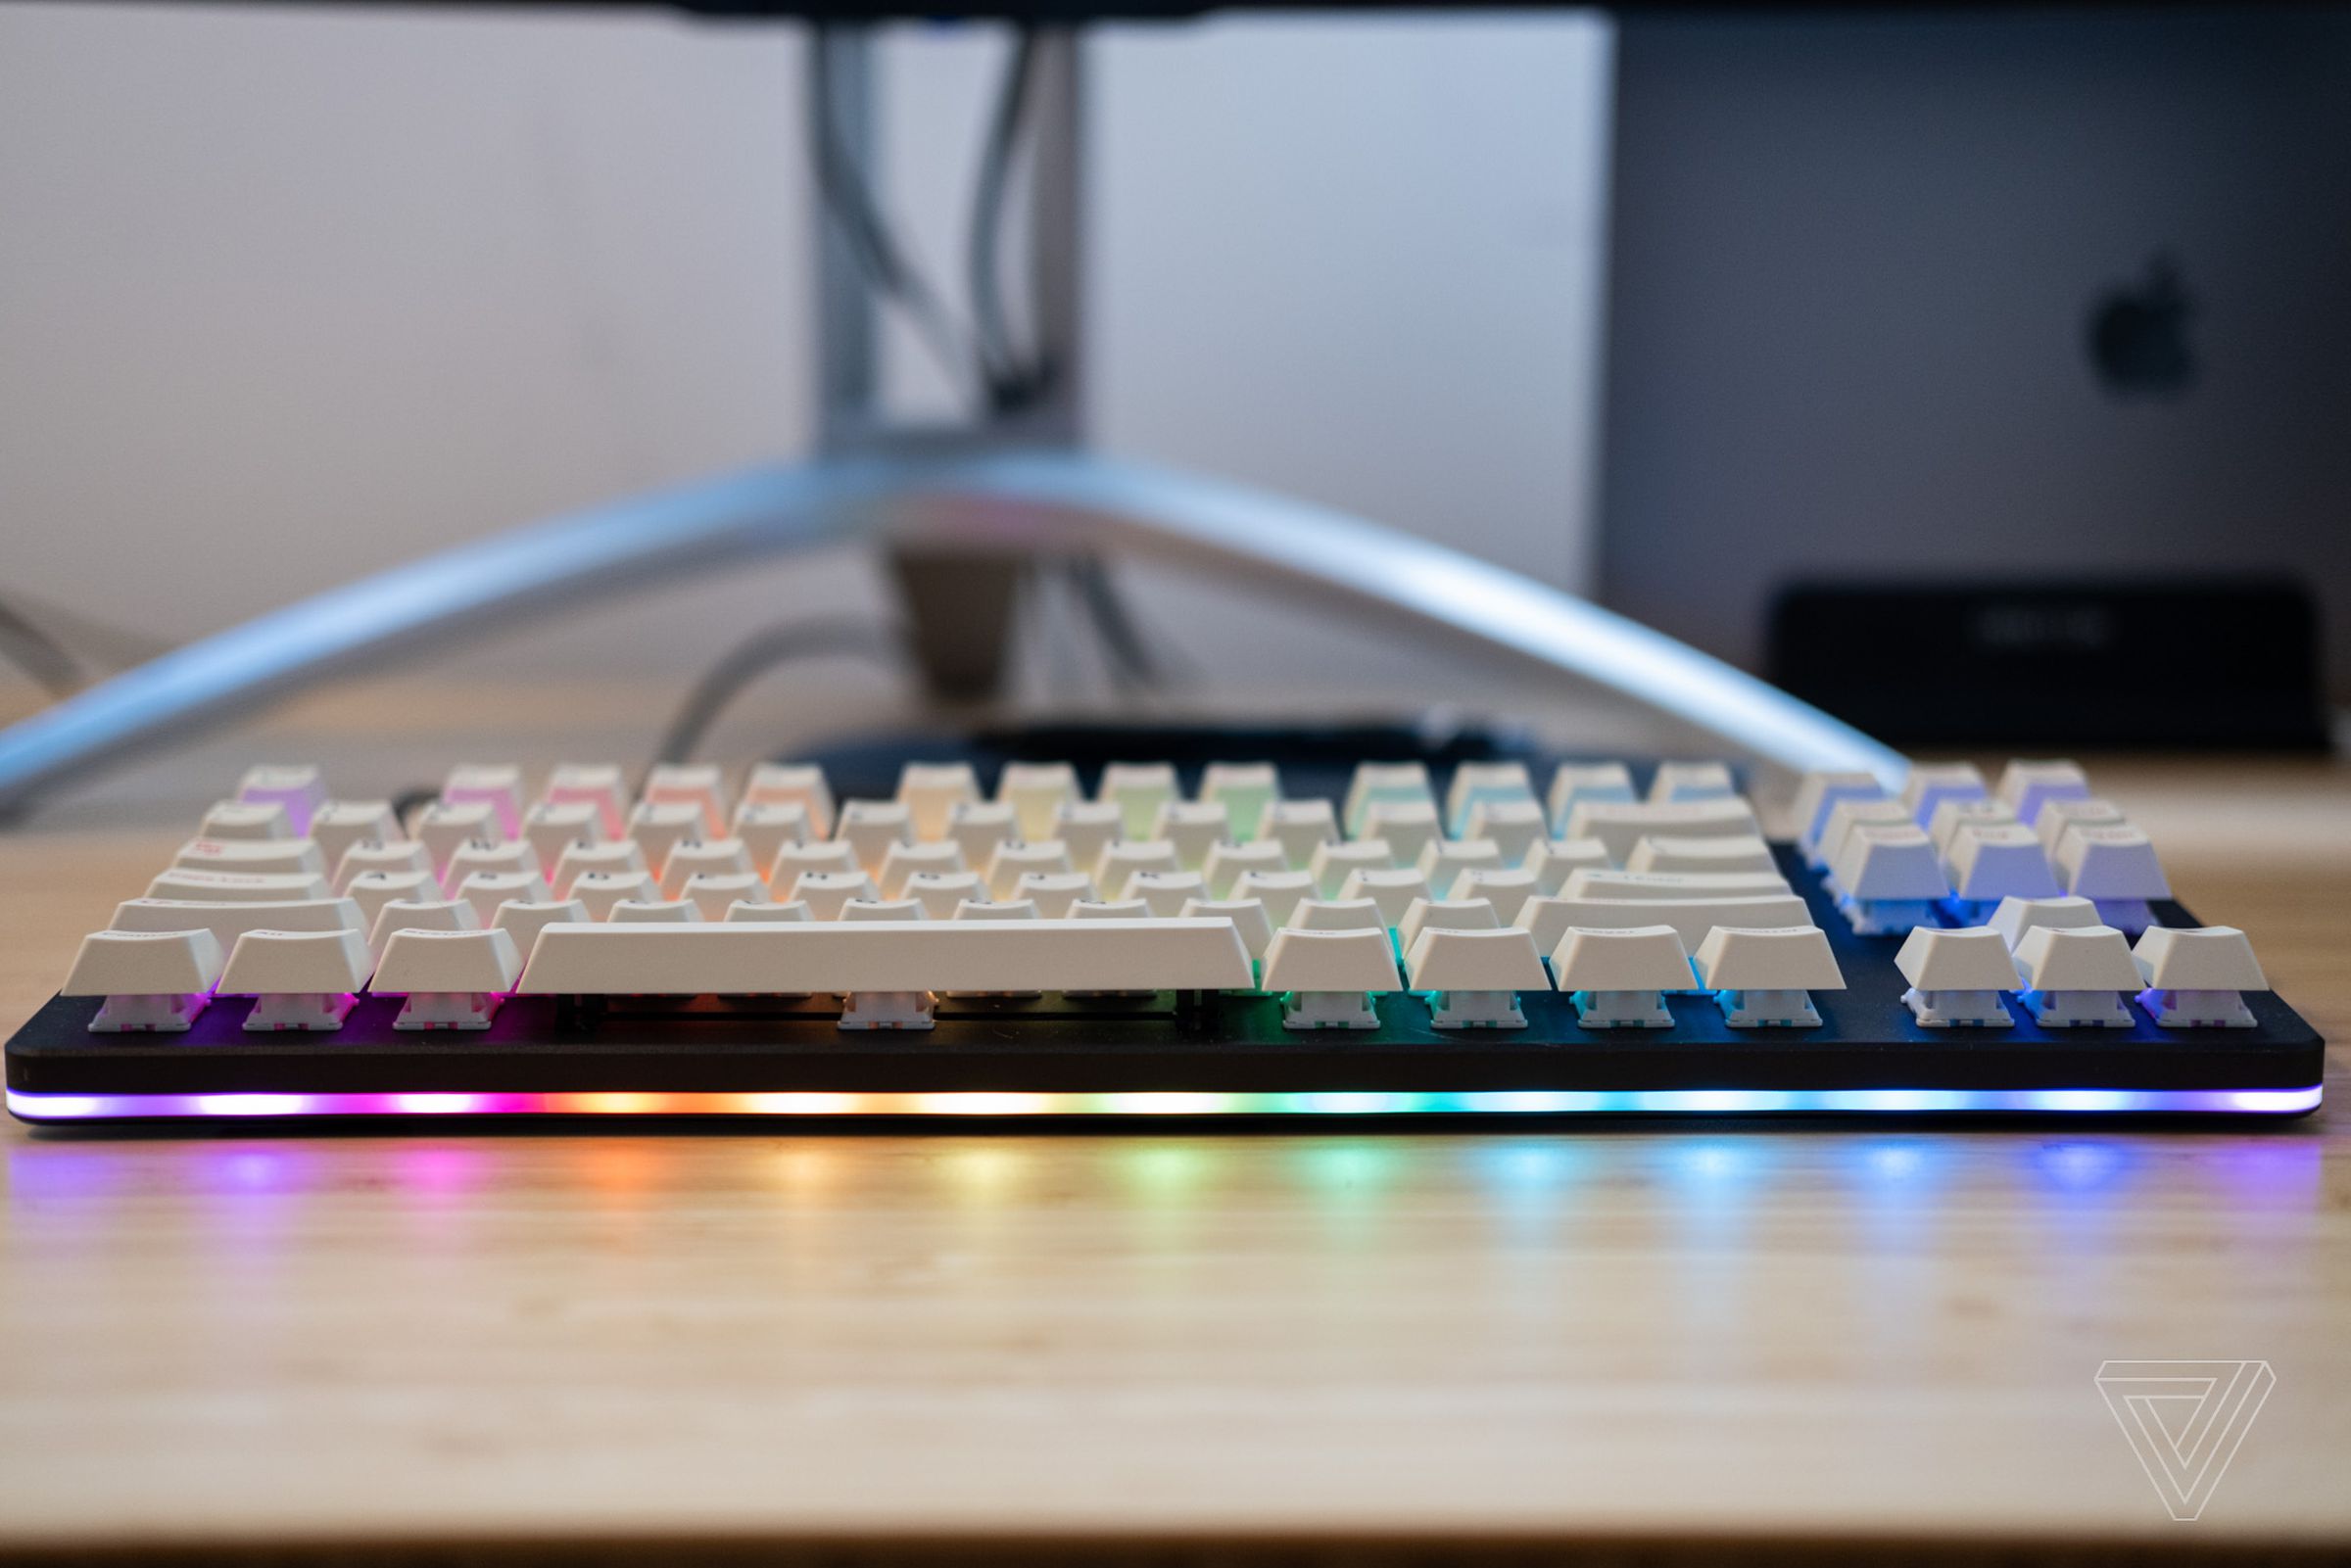 RGB lighting shines out the sides of the keyboard.